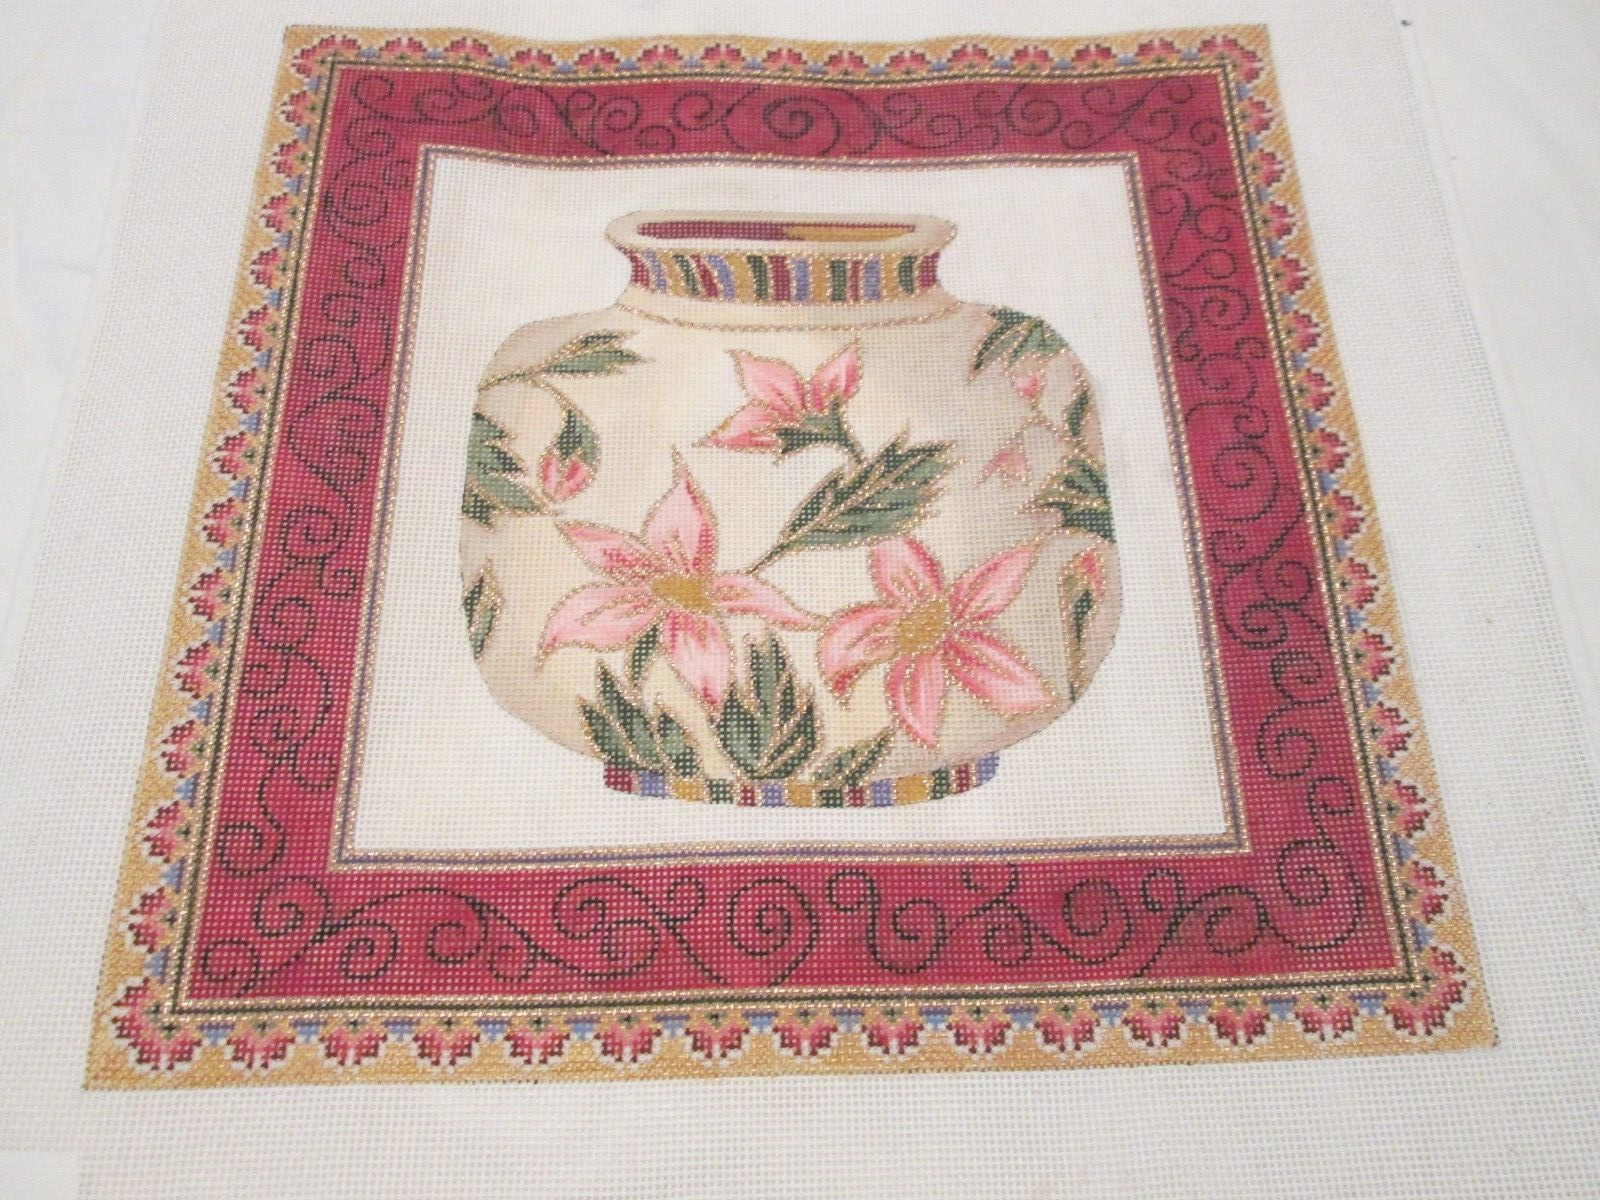 CHINESE VASE-CANVASWORKS TRADITIONS-HANDPAINTED NEEDLEPOINT CANVAS